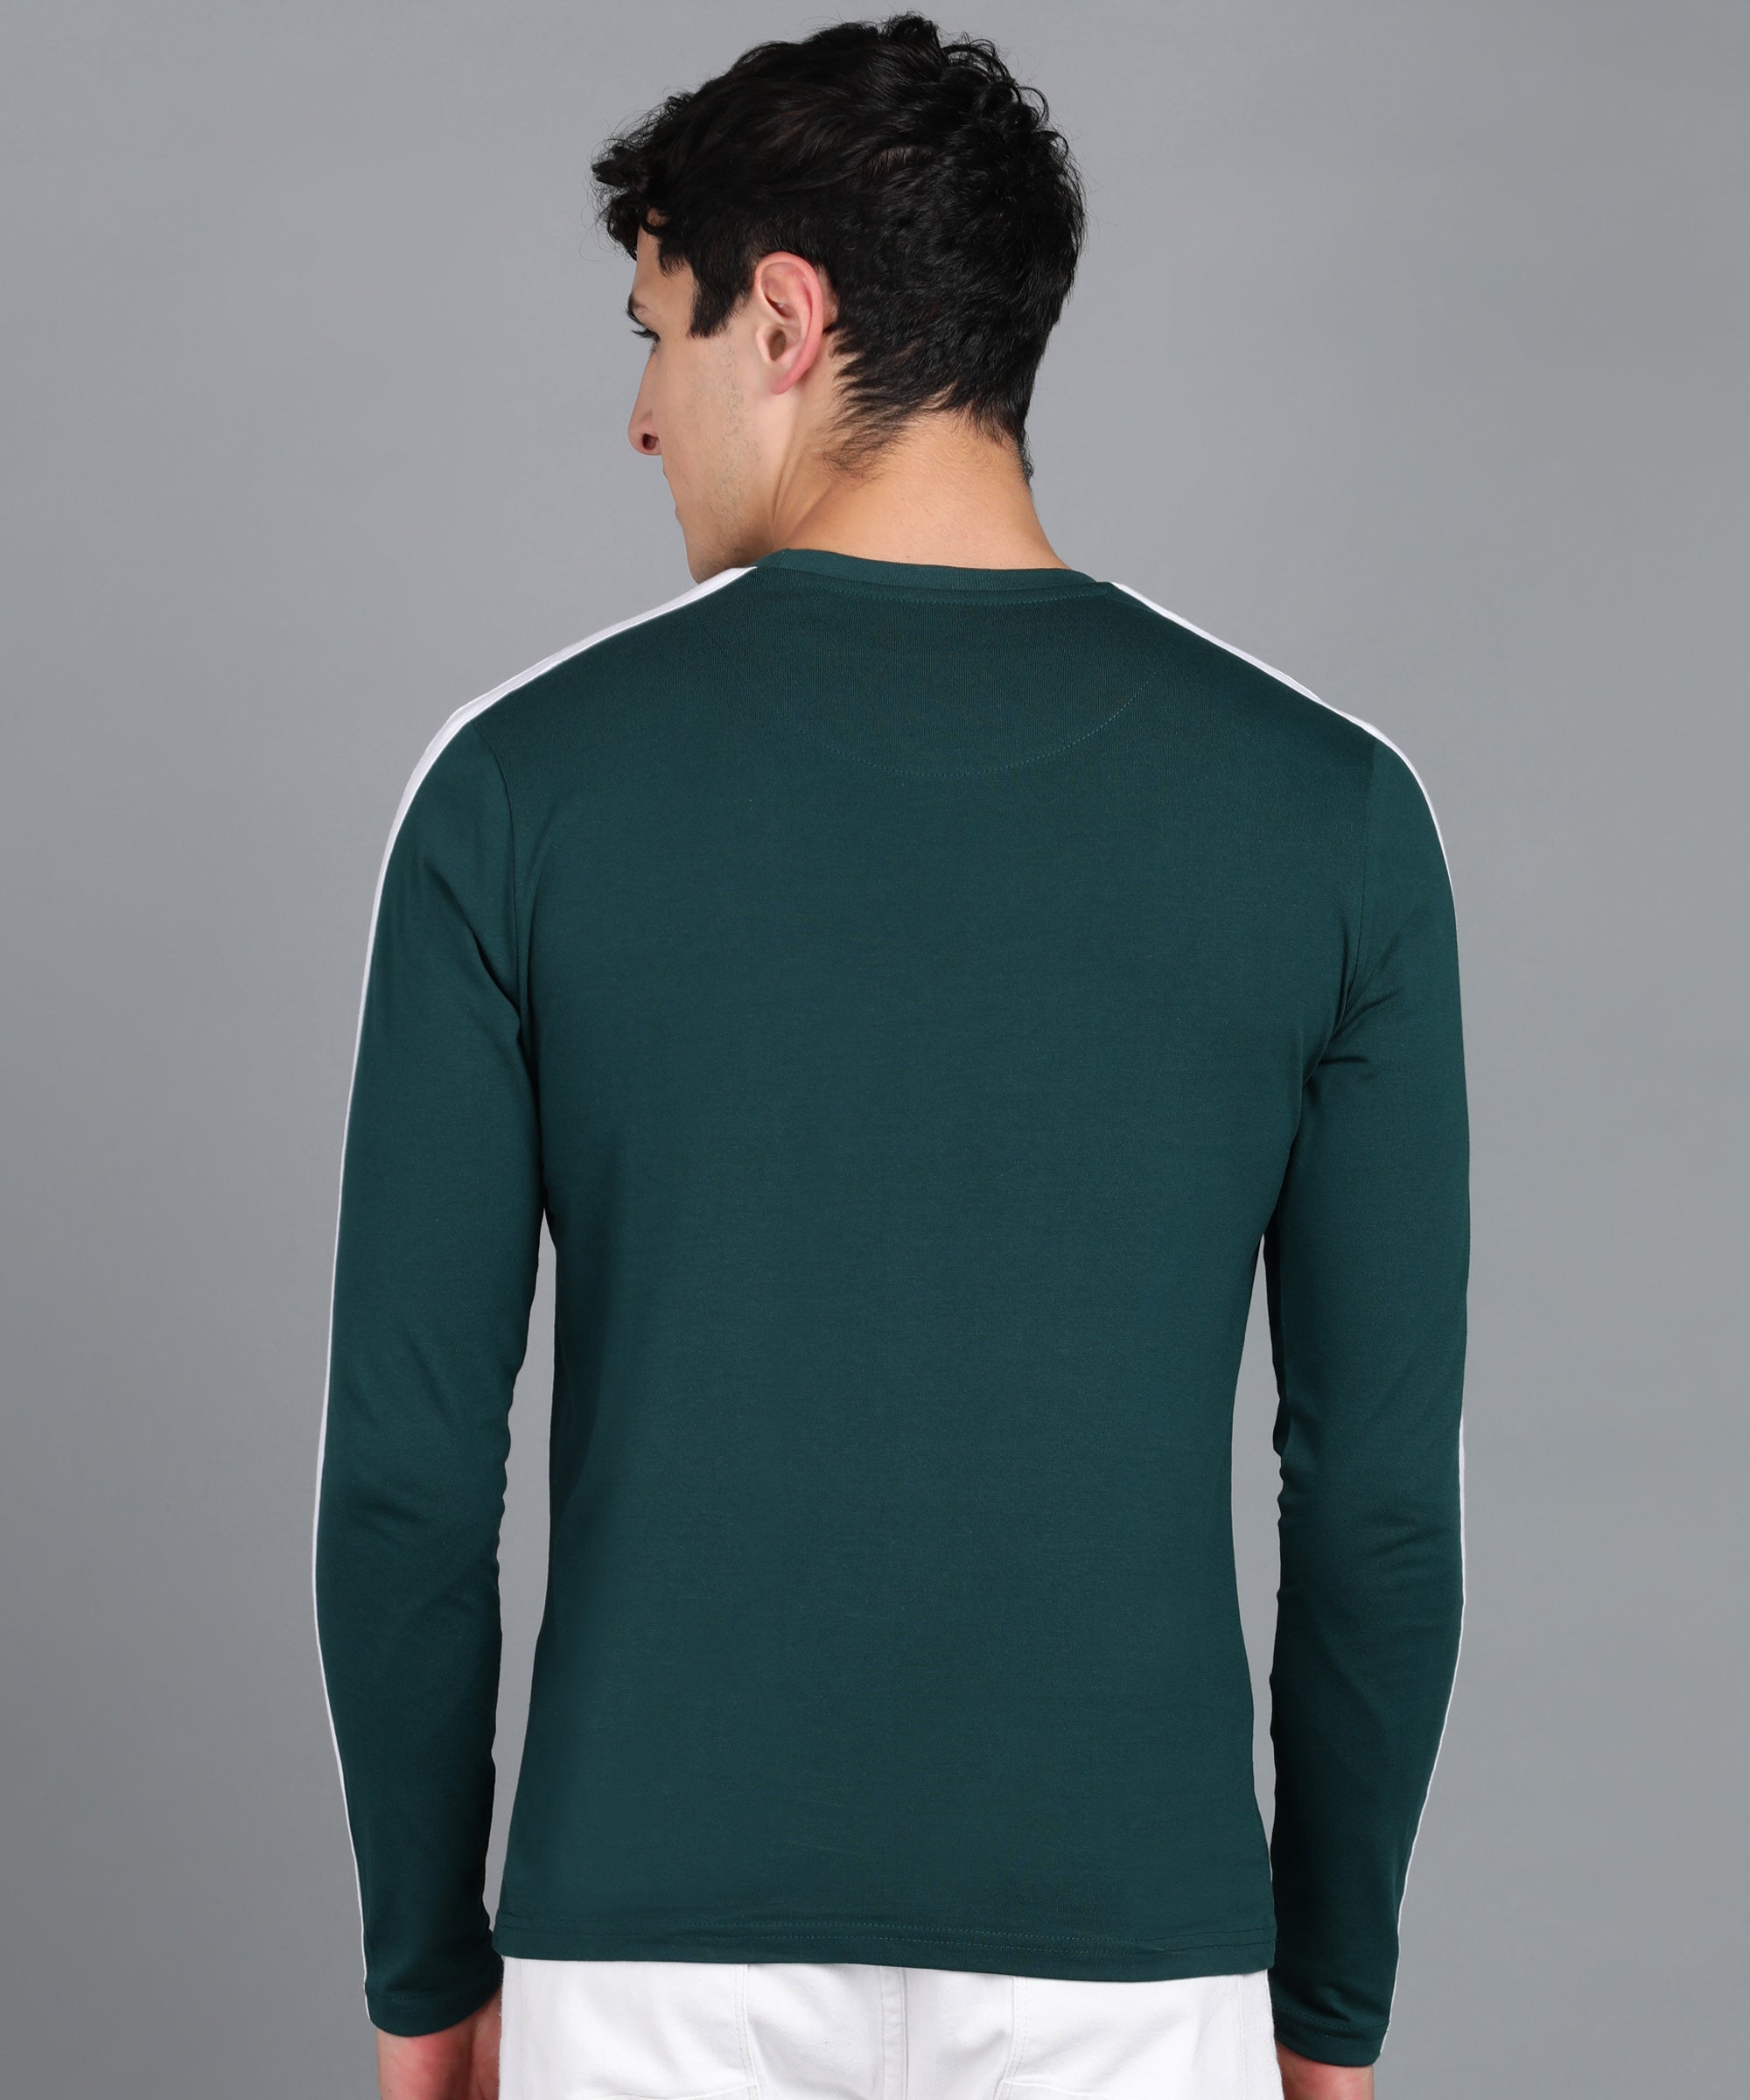 Men's Color-Block Green Round Neck Full Sleeve Slim Fit Cotton T-Shirt